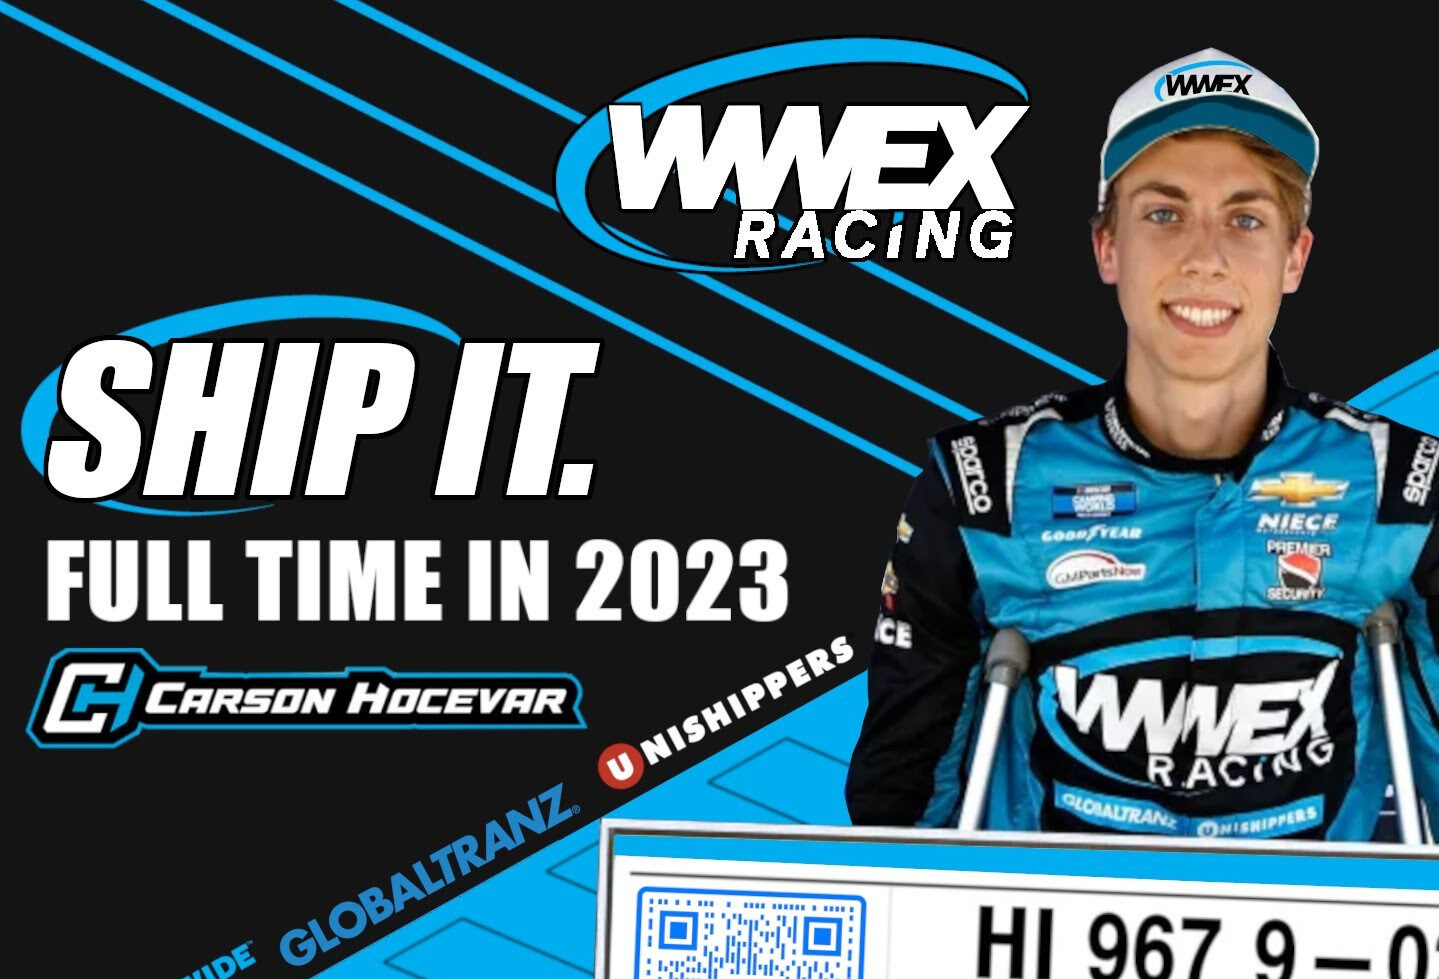 Carson Hocevar and WWEX Racing to Partner for Full Season in 2023 –